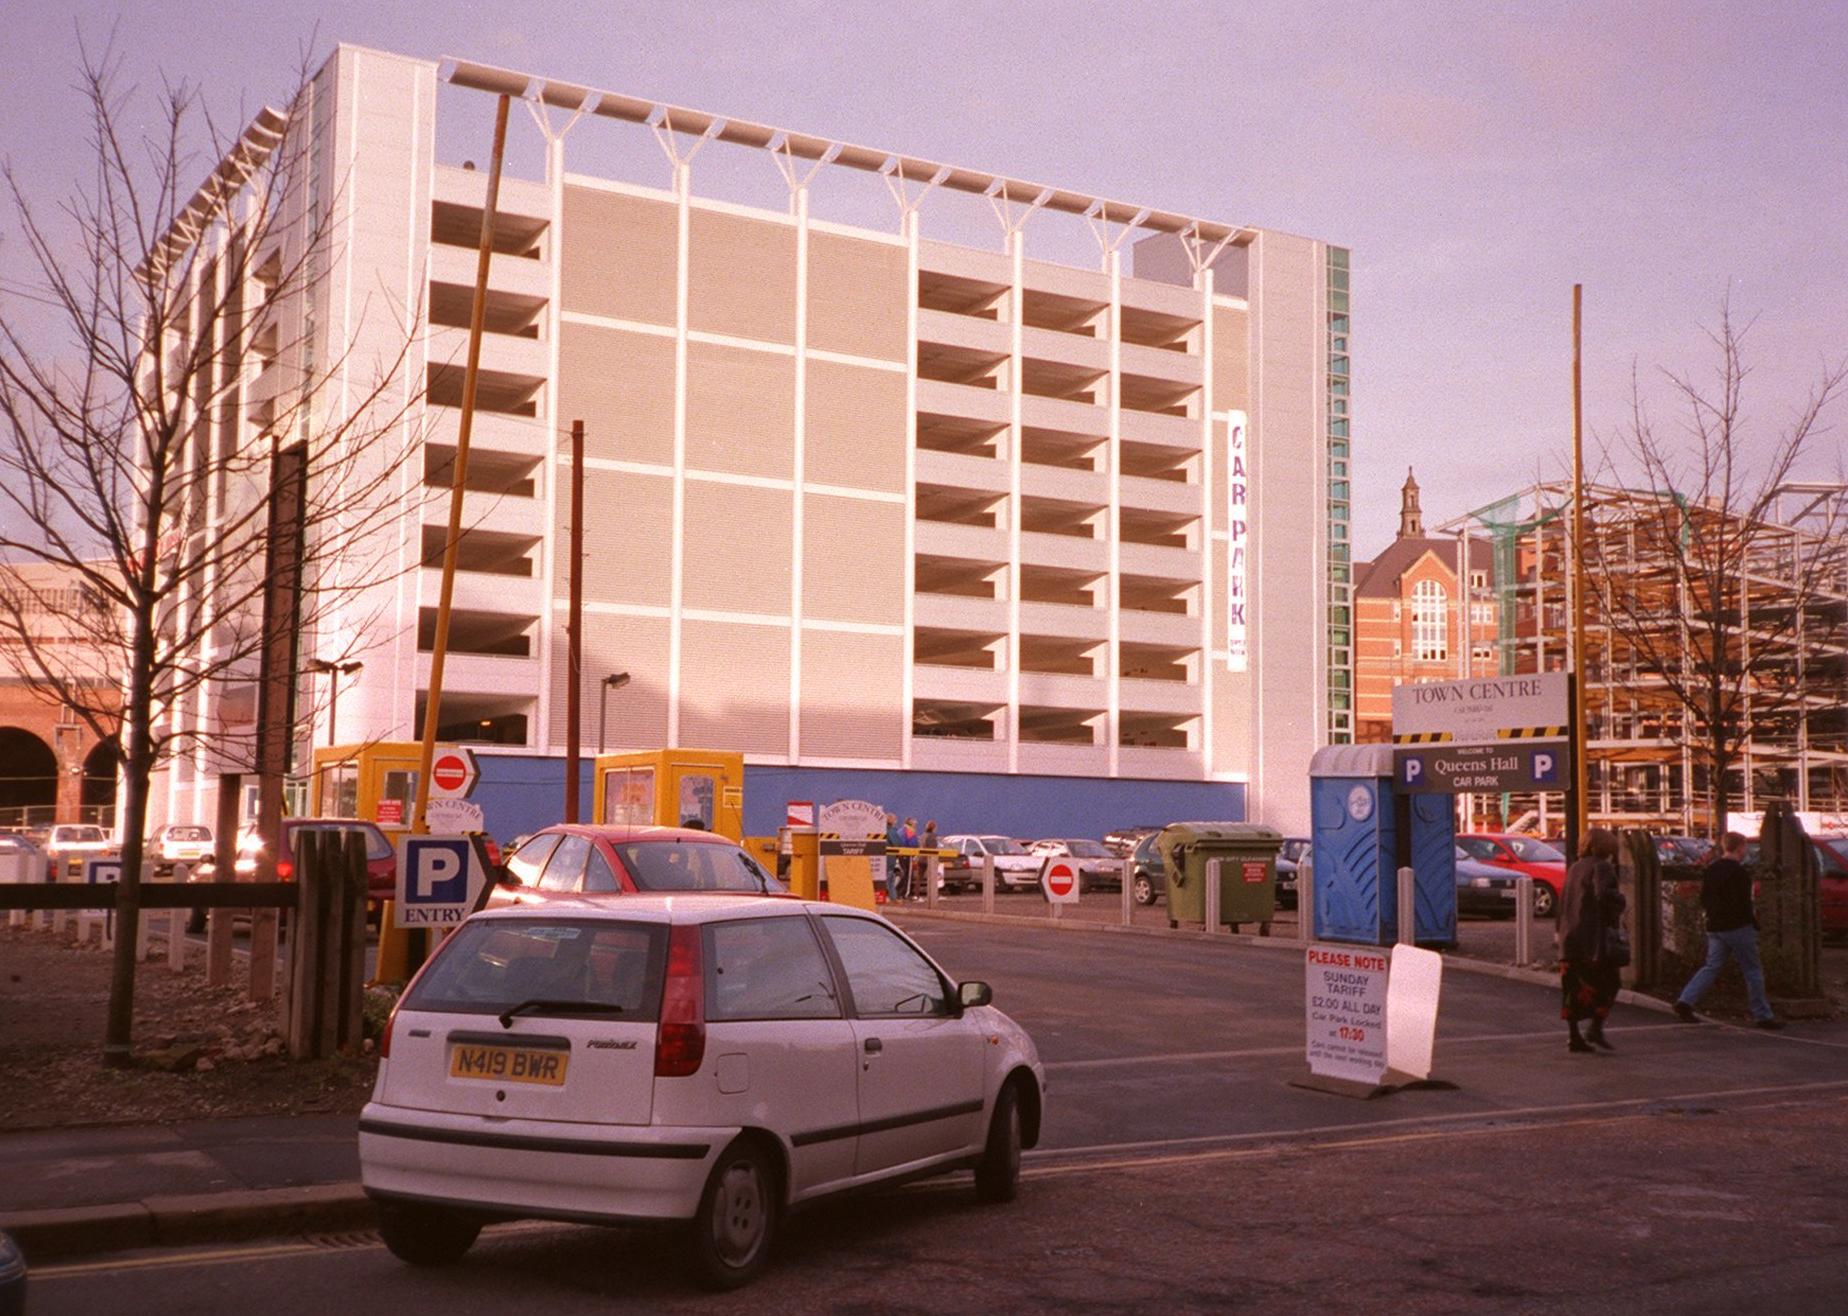 The Criterion Place car park in Leeds city centre opened.